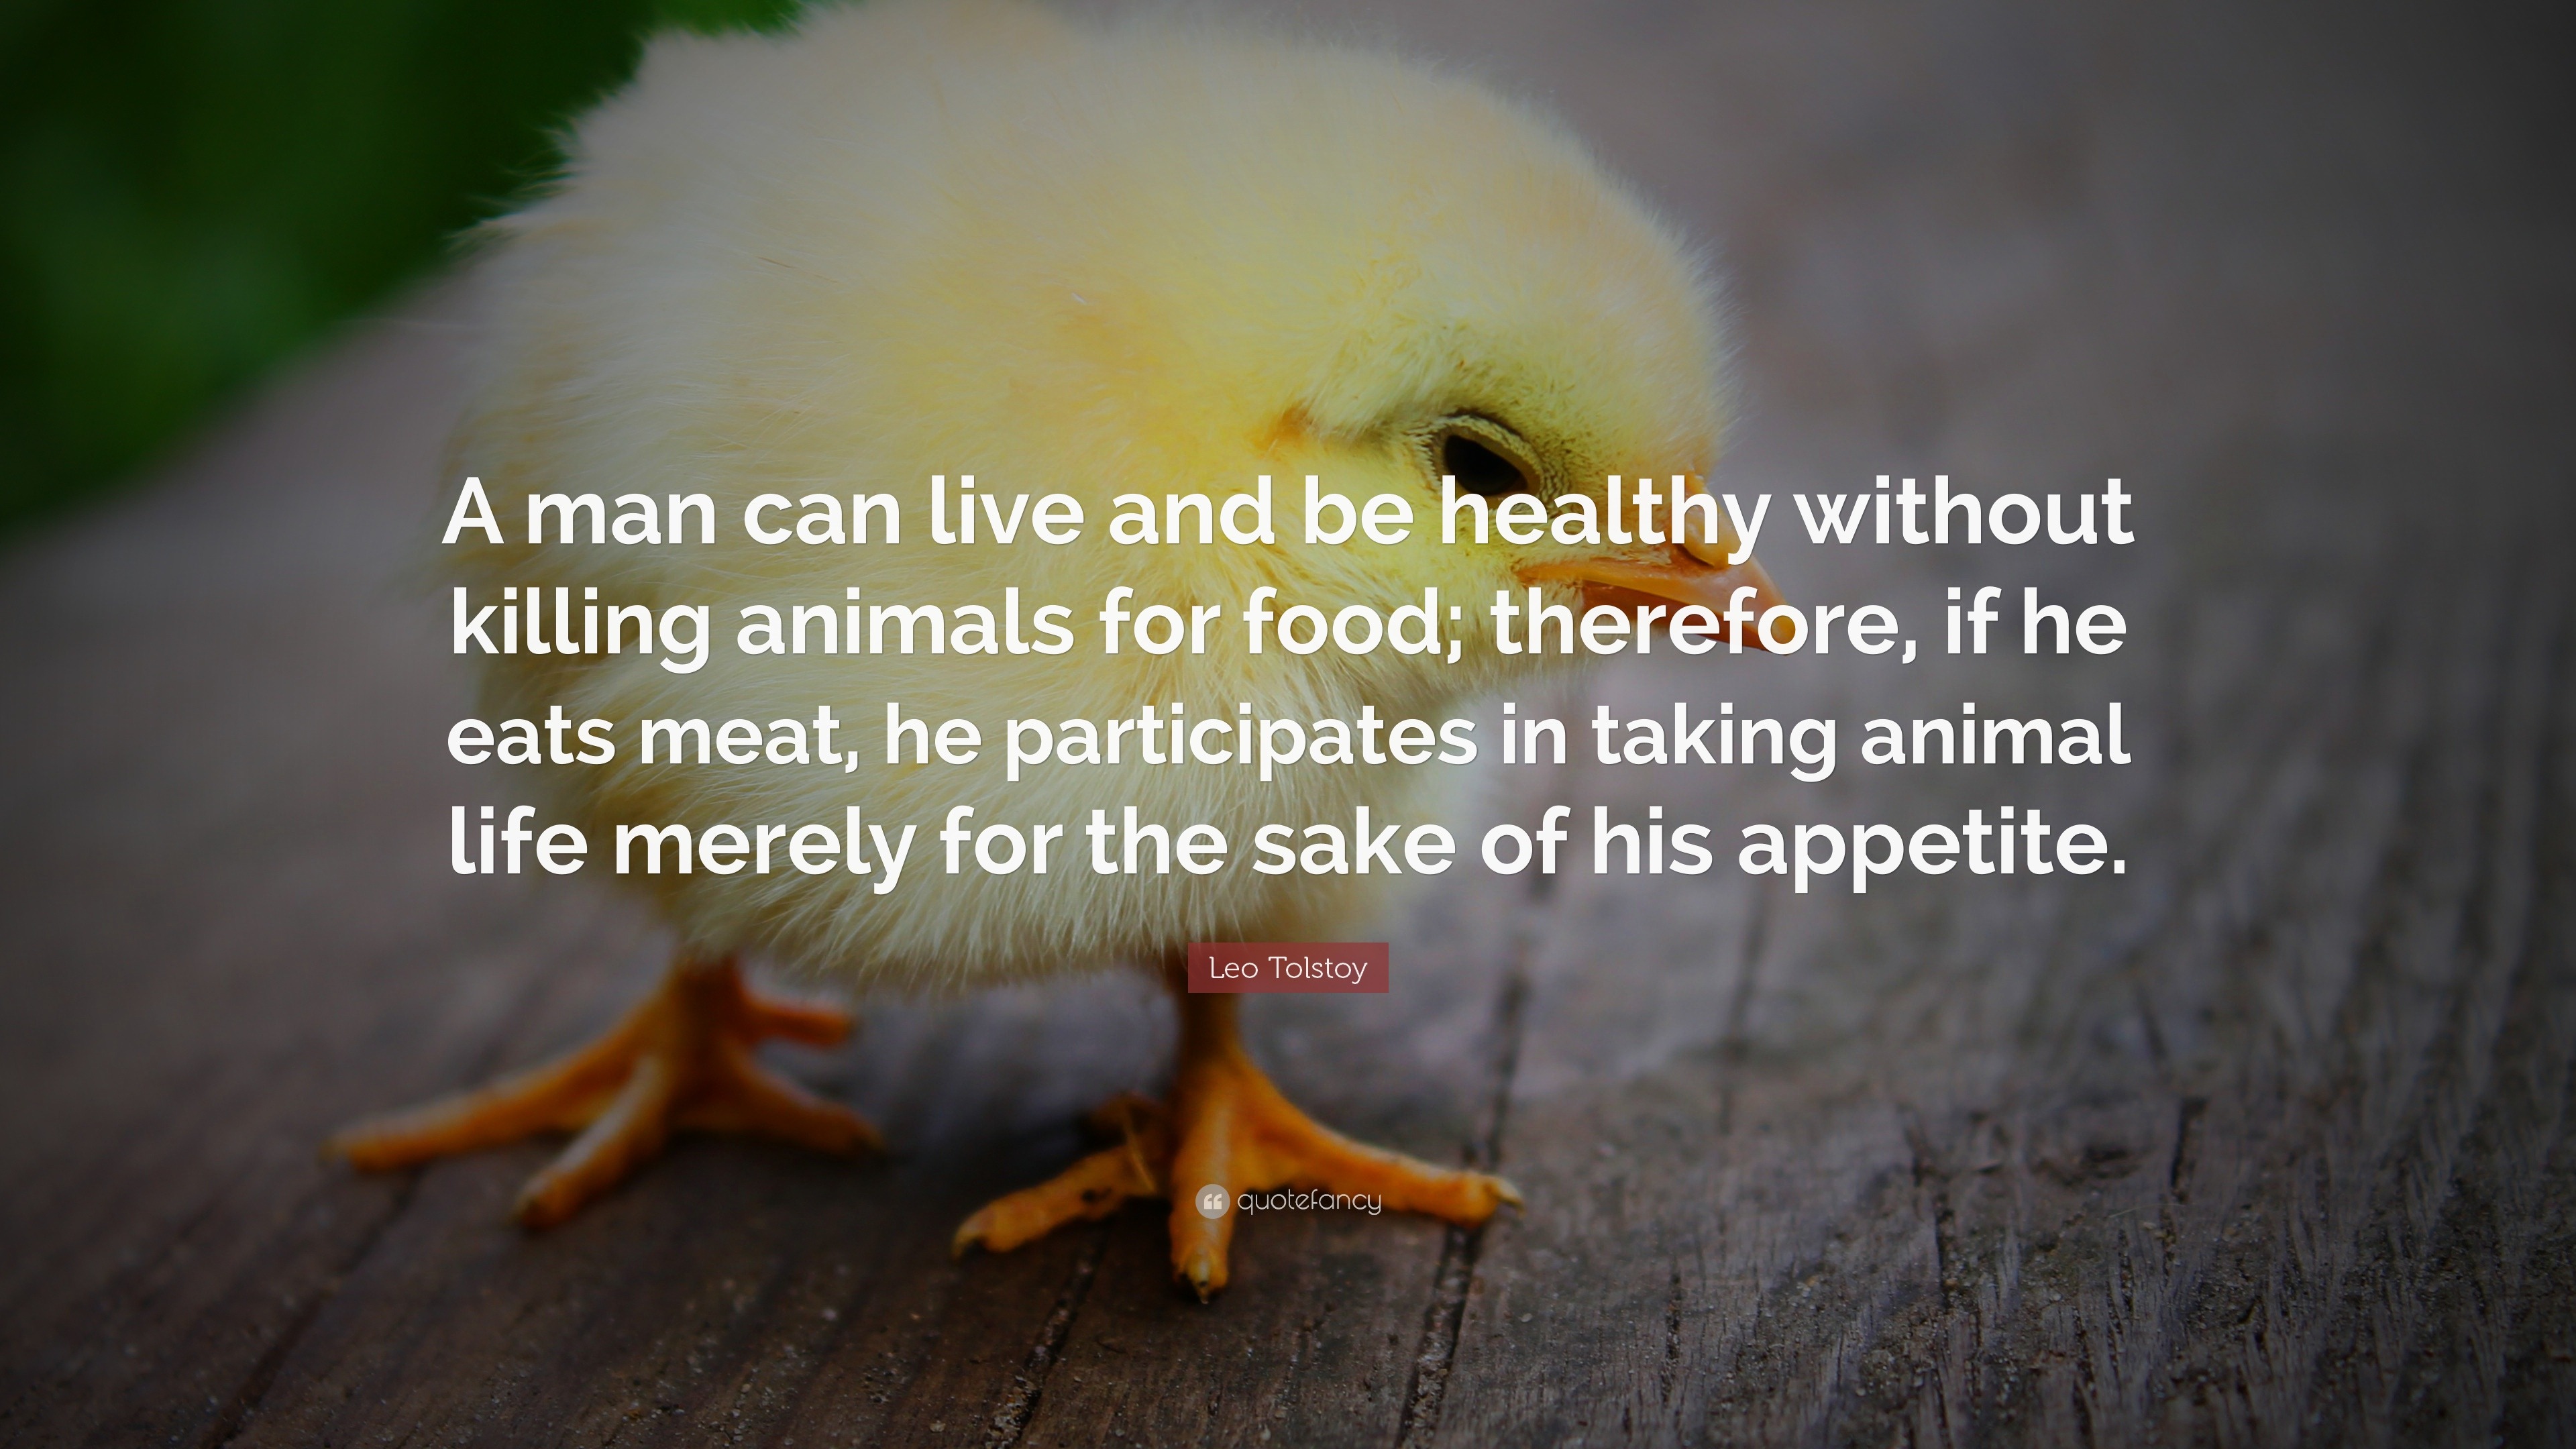 Leo Tolstoy Quote “A man can live and be healthy without killing animals for